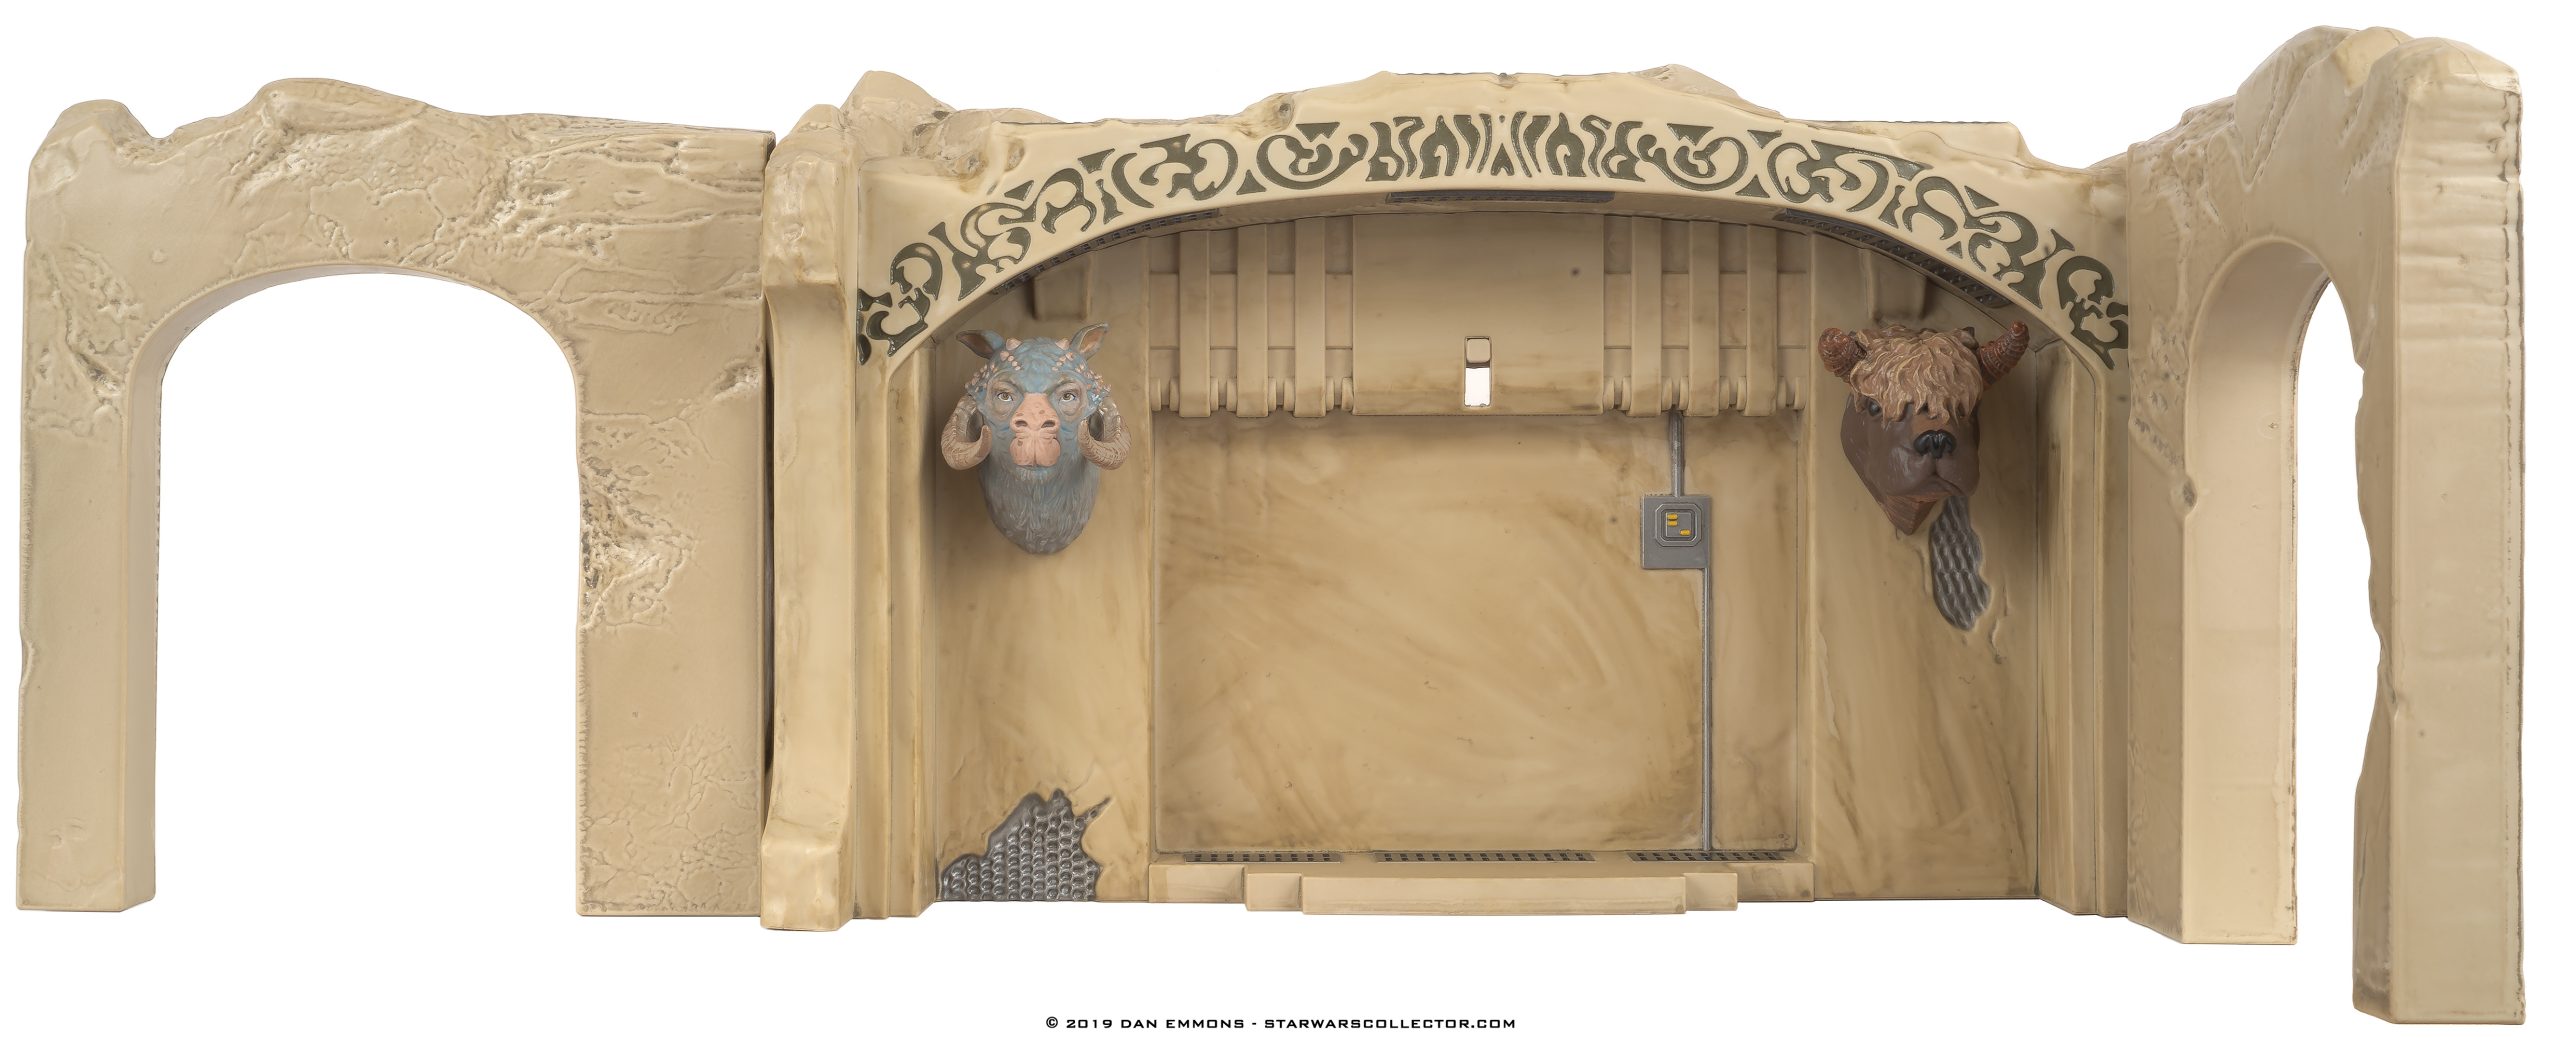 The Vintage Collection - Jabba's Palace Adventure Set